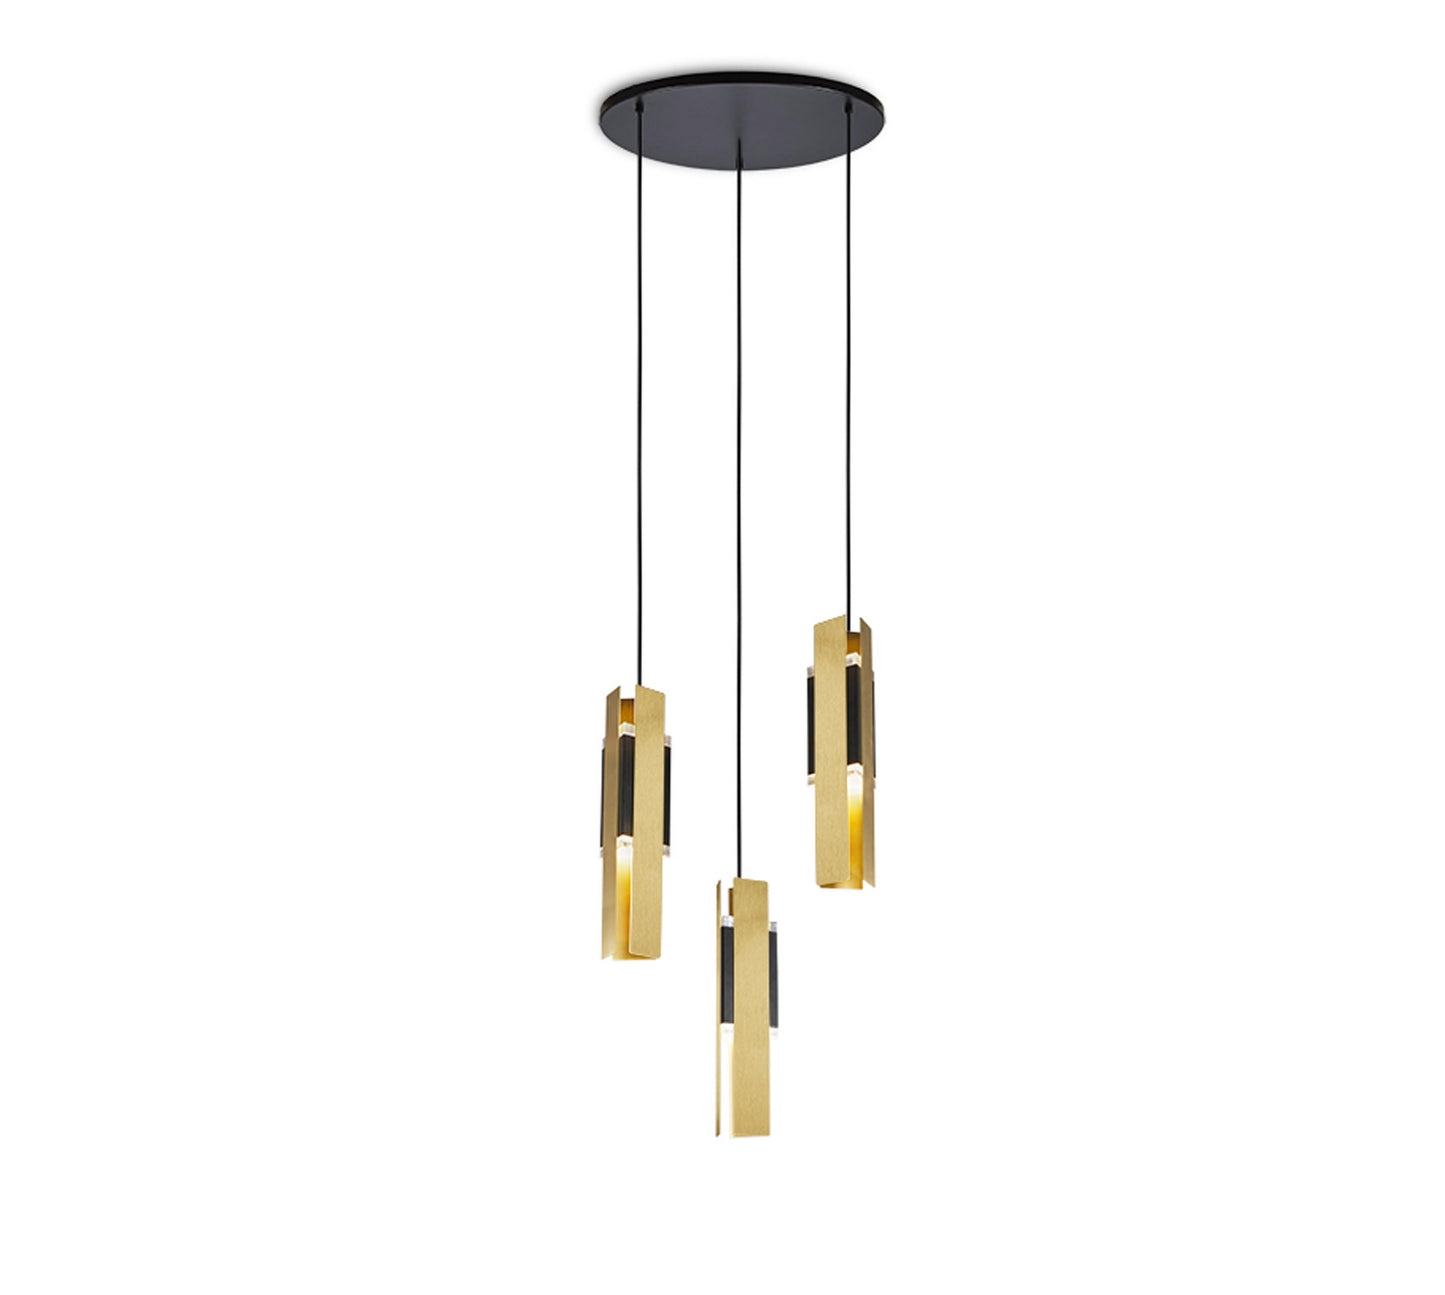 EXCALIBUR CHANDELIER 559.13 BY TOOY $1,998.00